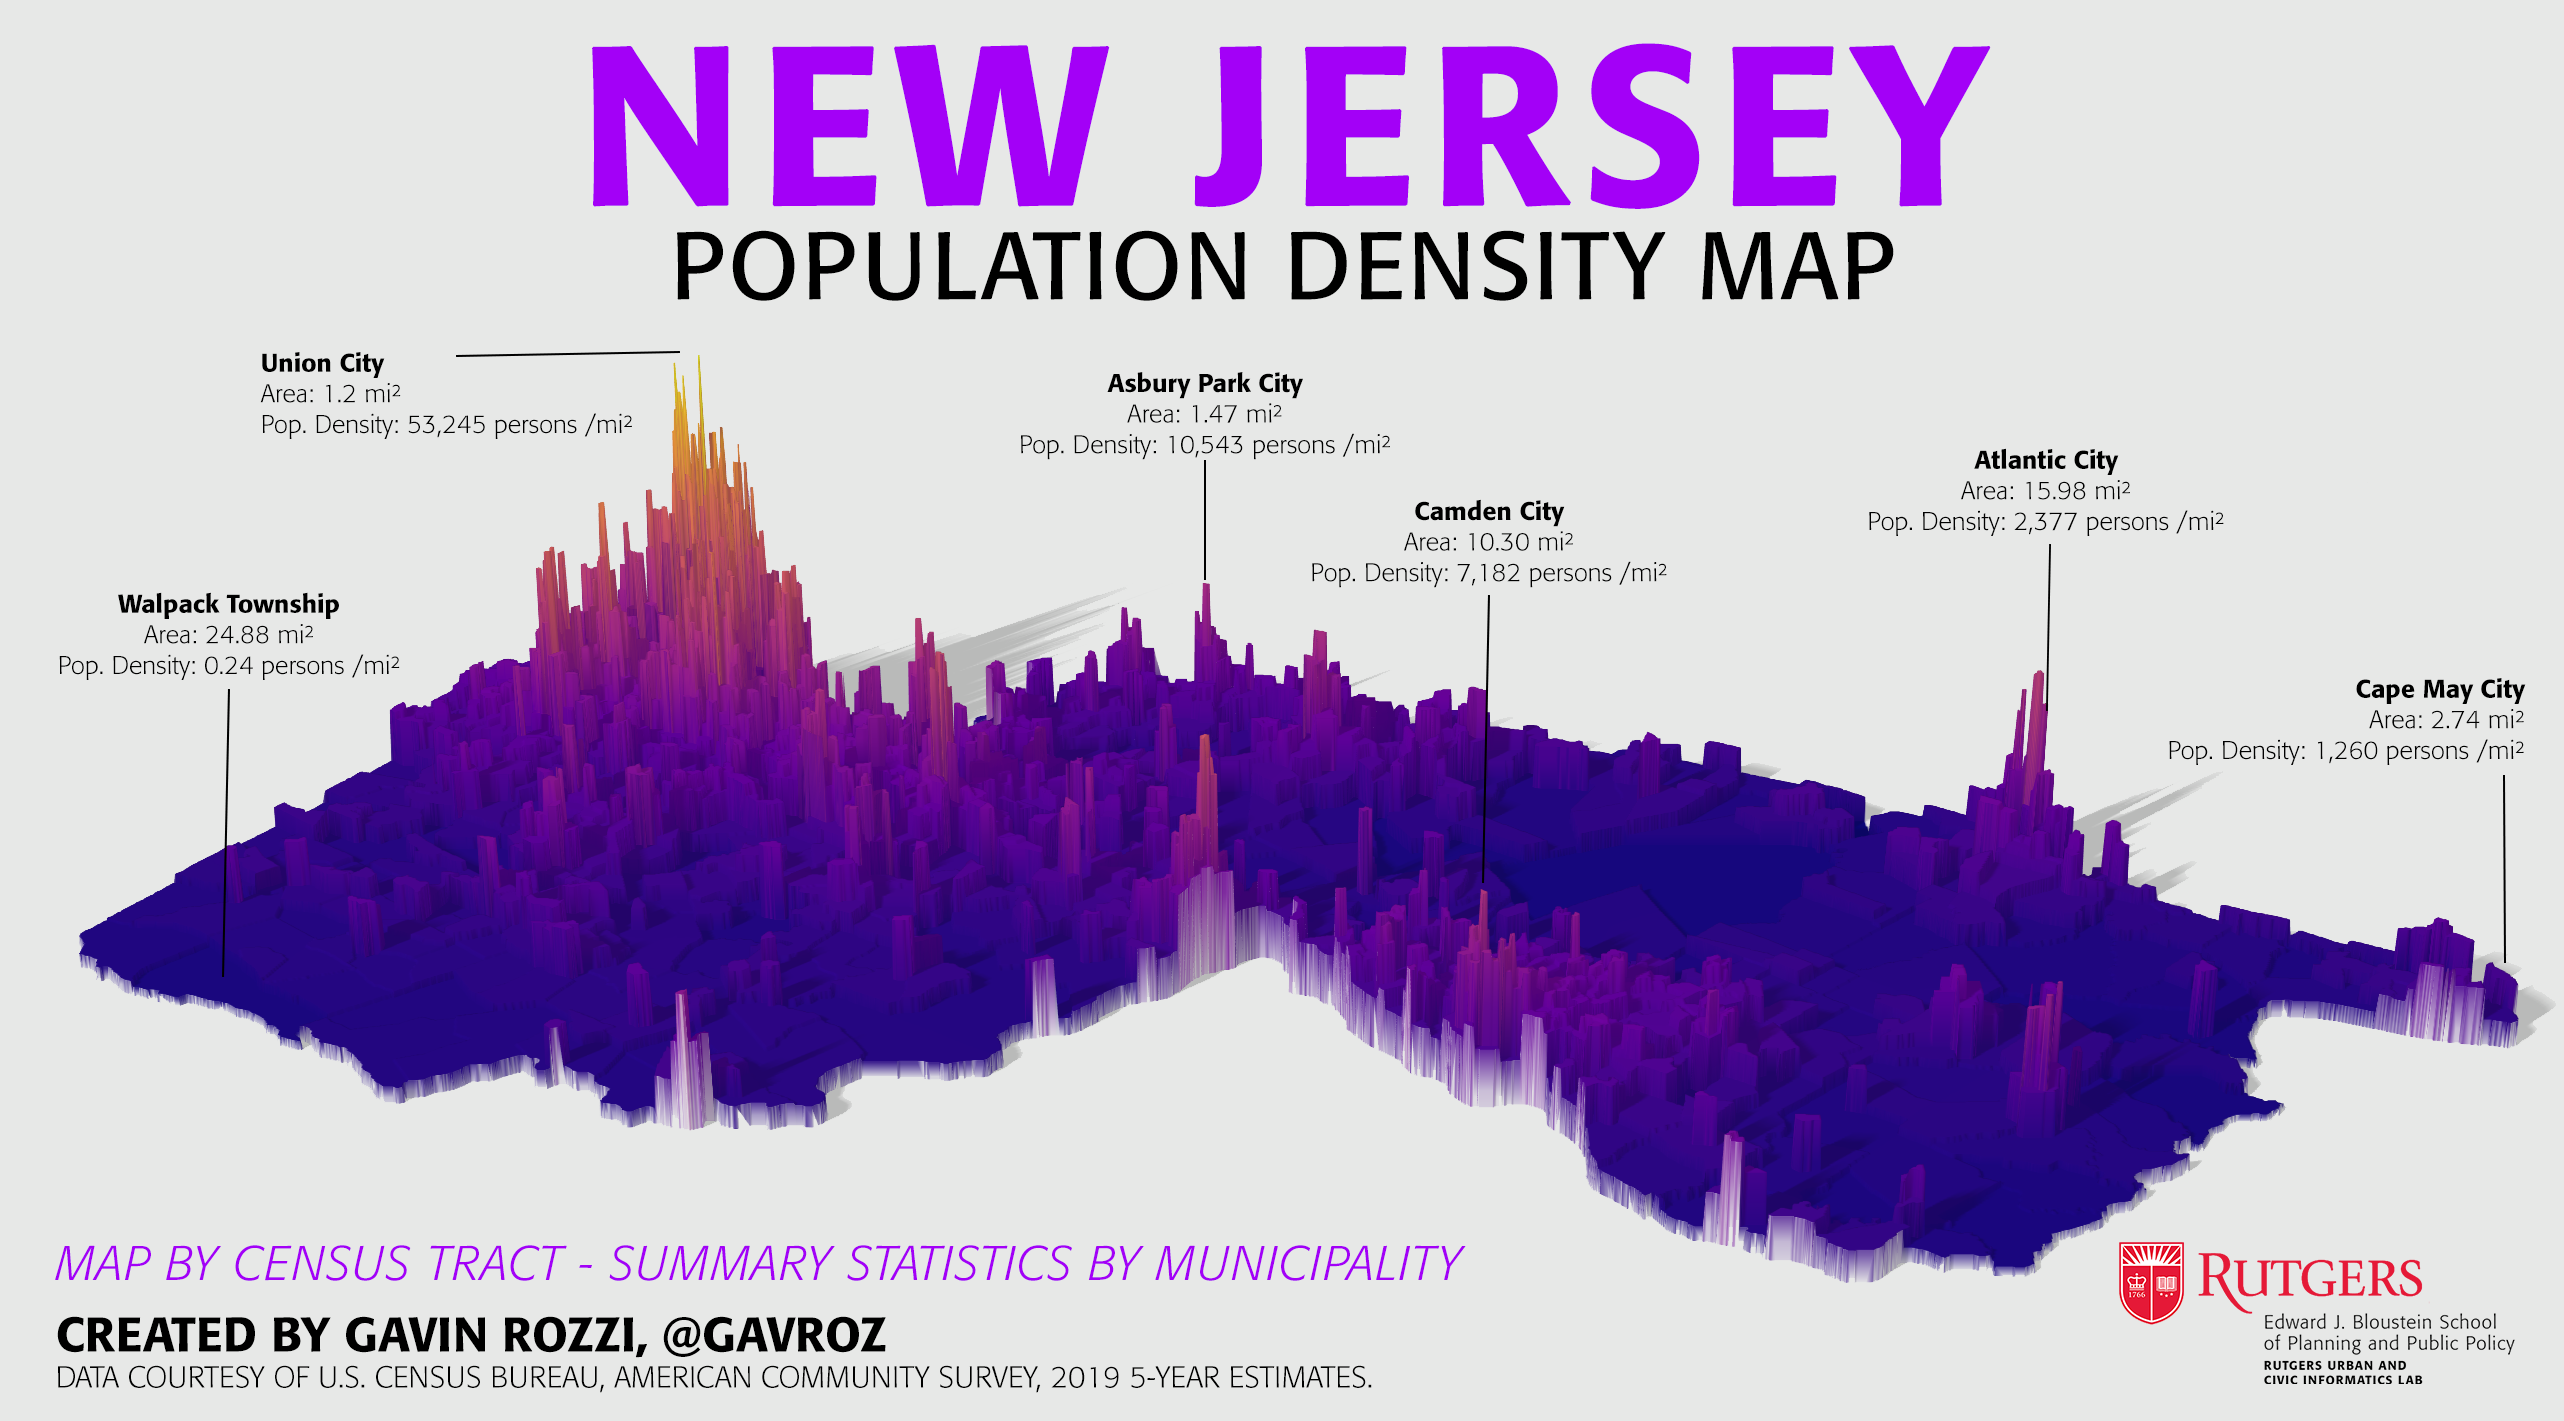 Gavin Rozzi awarded first place for New Jersey Population Density Map